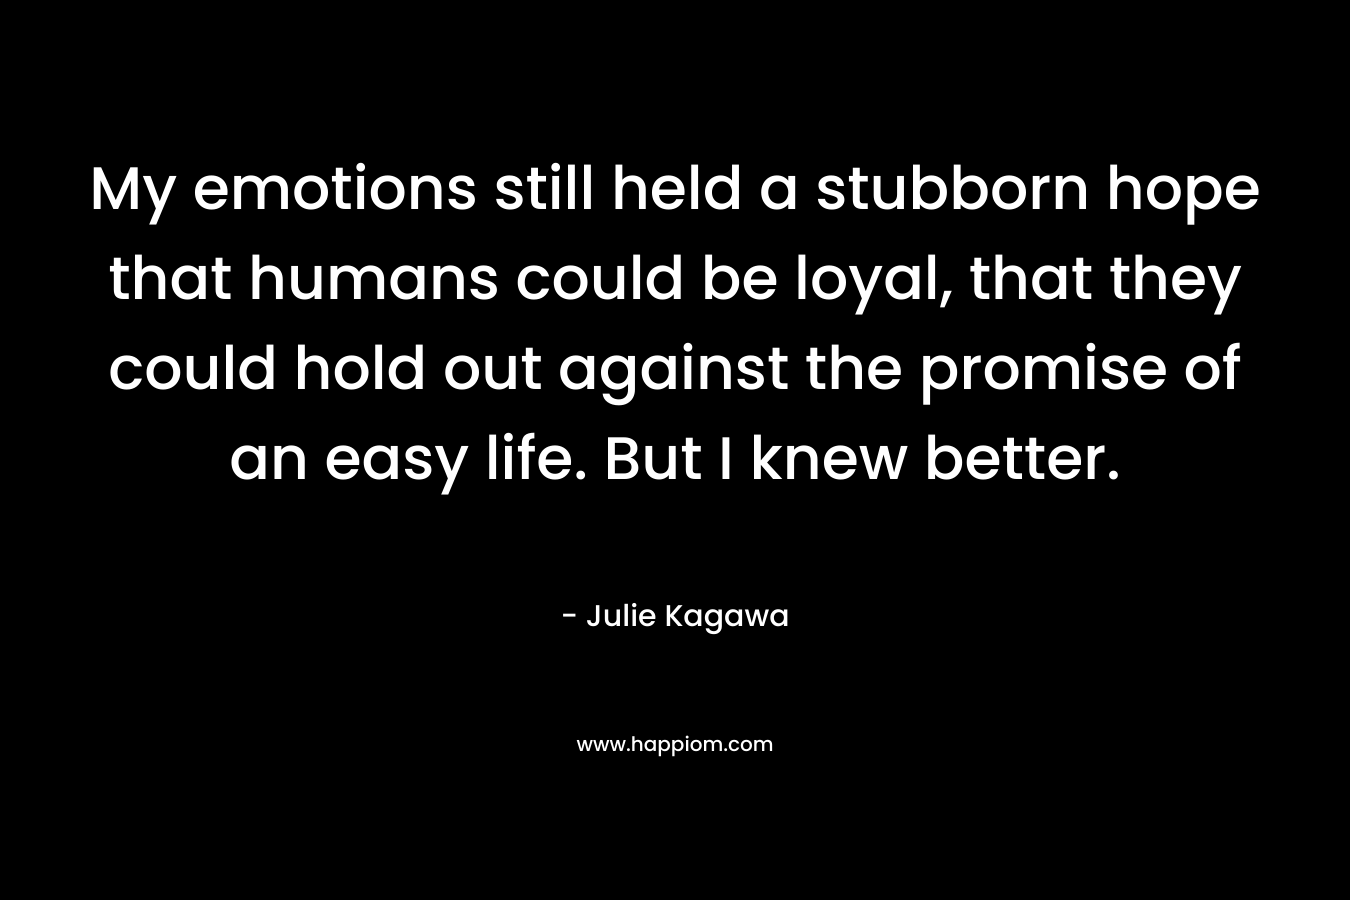 My emotions still held a stubborn hope that humans could be loyal, that they could hold out against the promise of an easy life. But I knew better. – Julie Kagawa